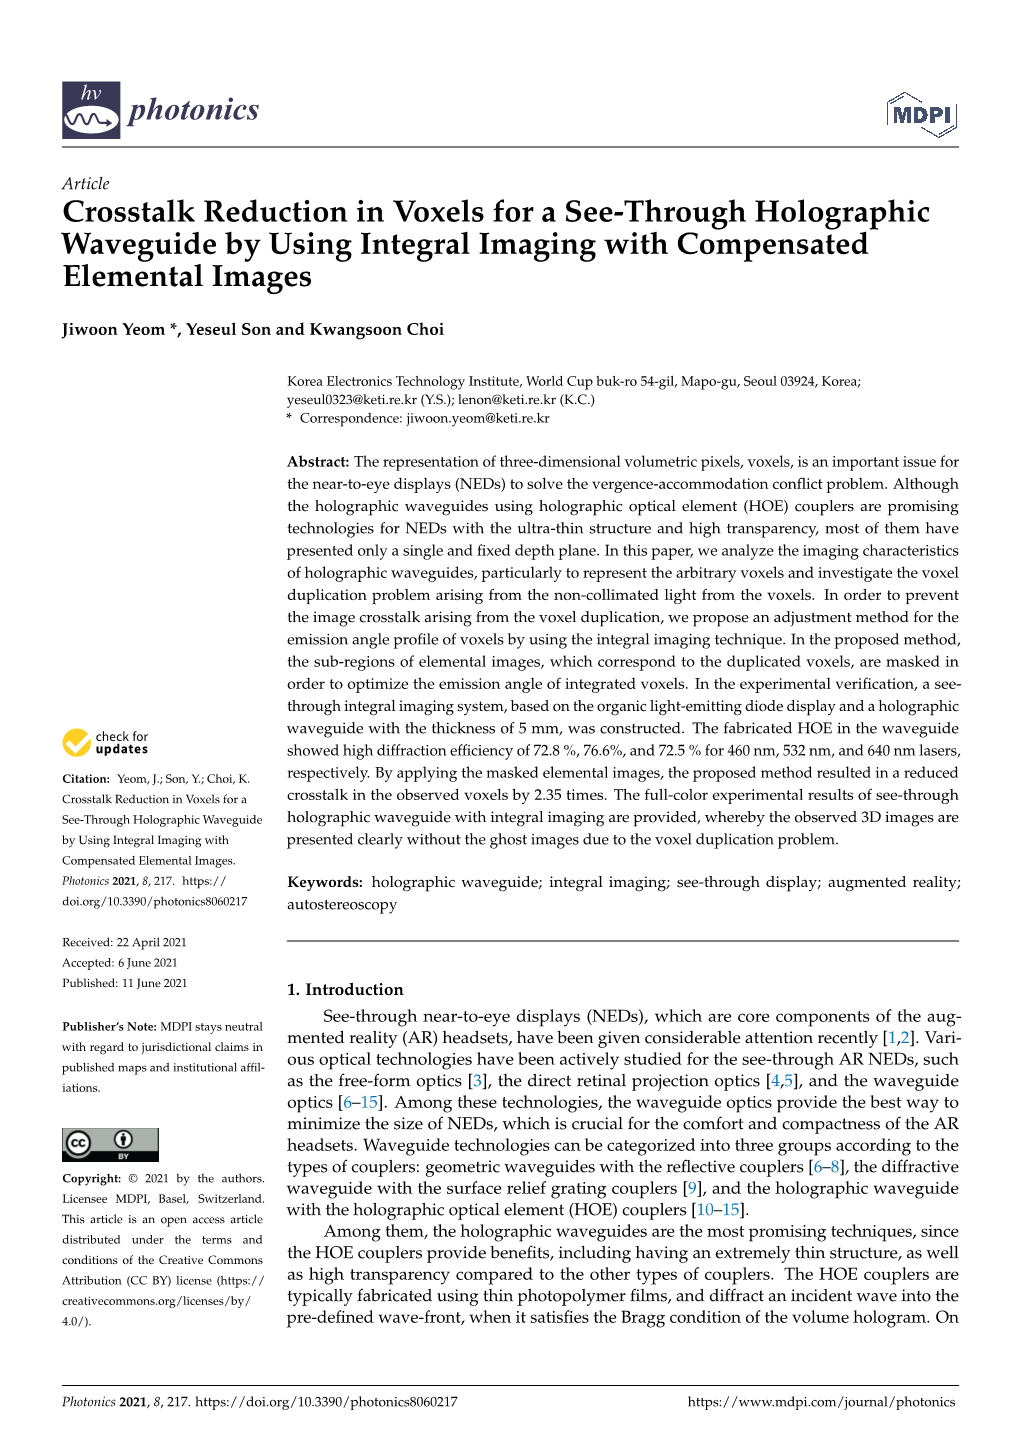 Crosstalk Reduction in Voxels for a See-Through Holographic Waveguide by Using Integral Imaging with Compensated Elemental Images